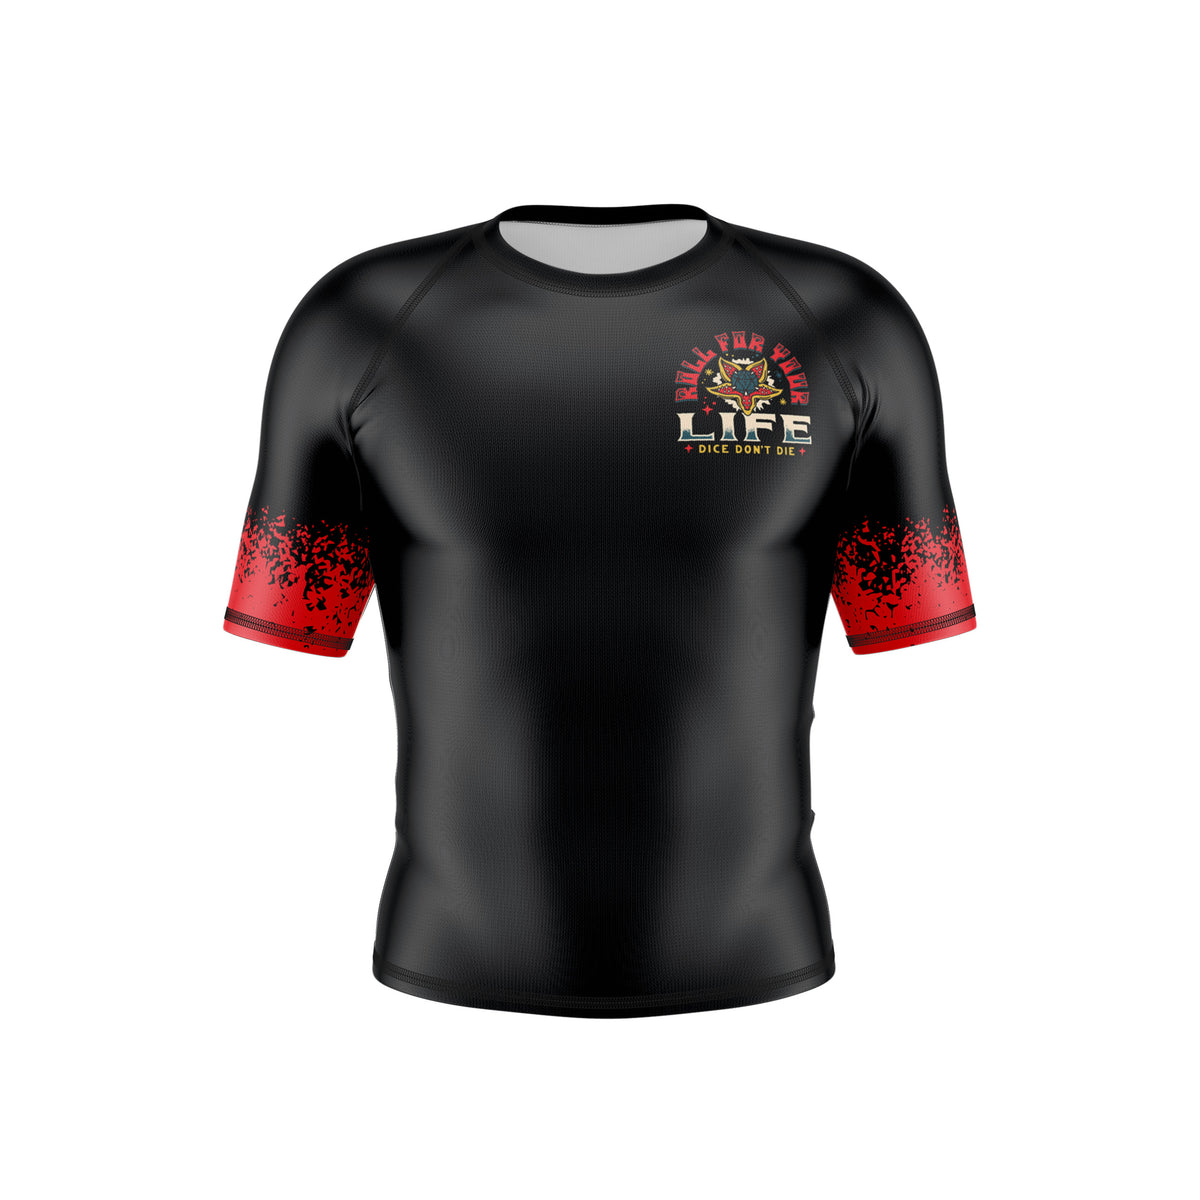 Roll For Your Life Rash Guard - Men